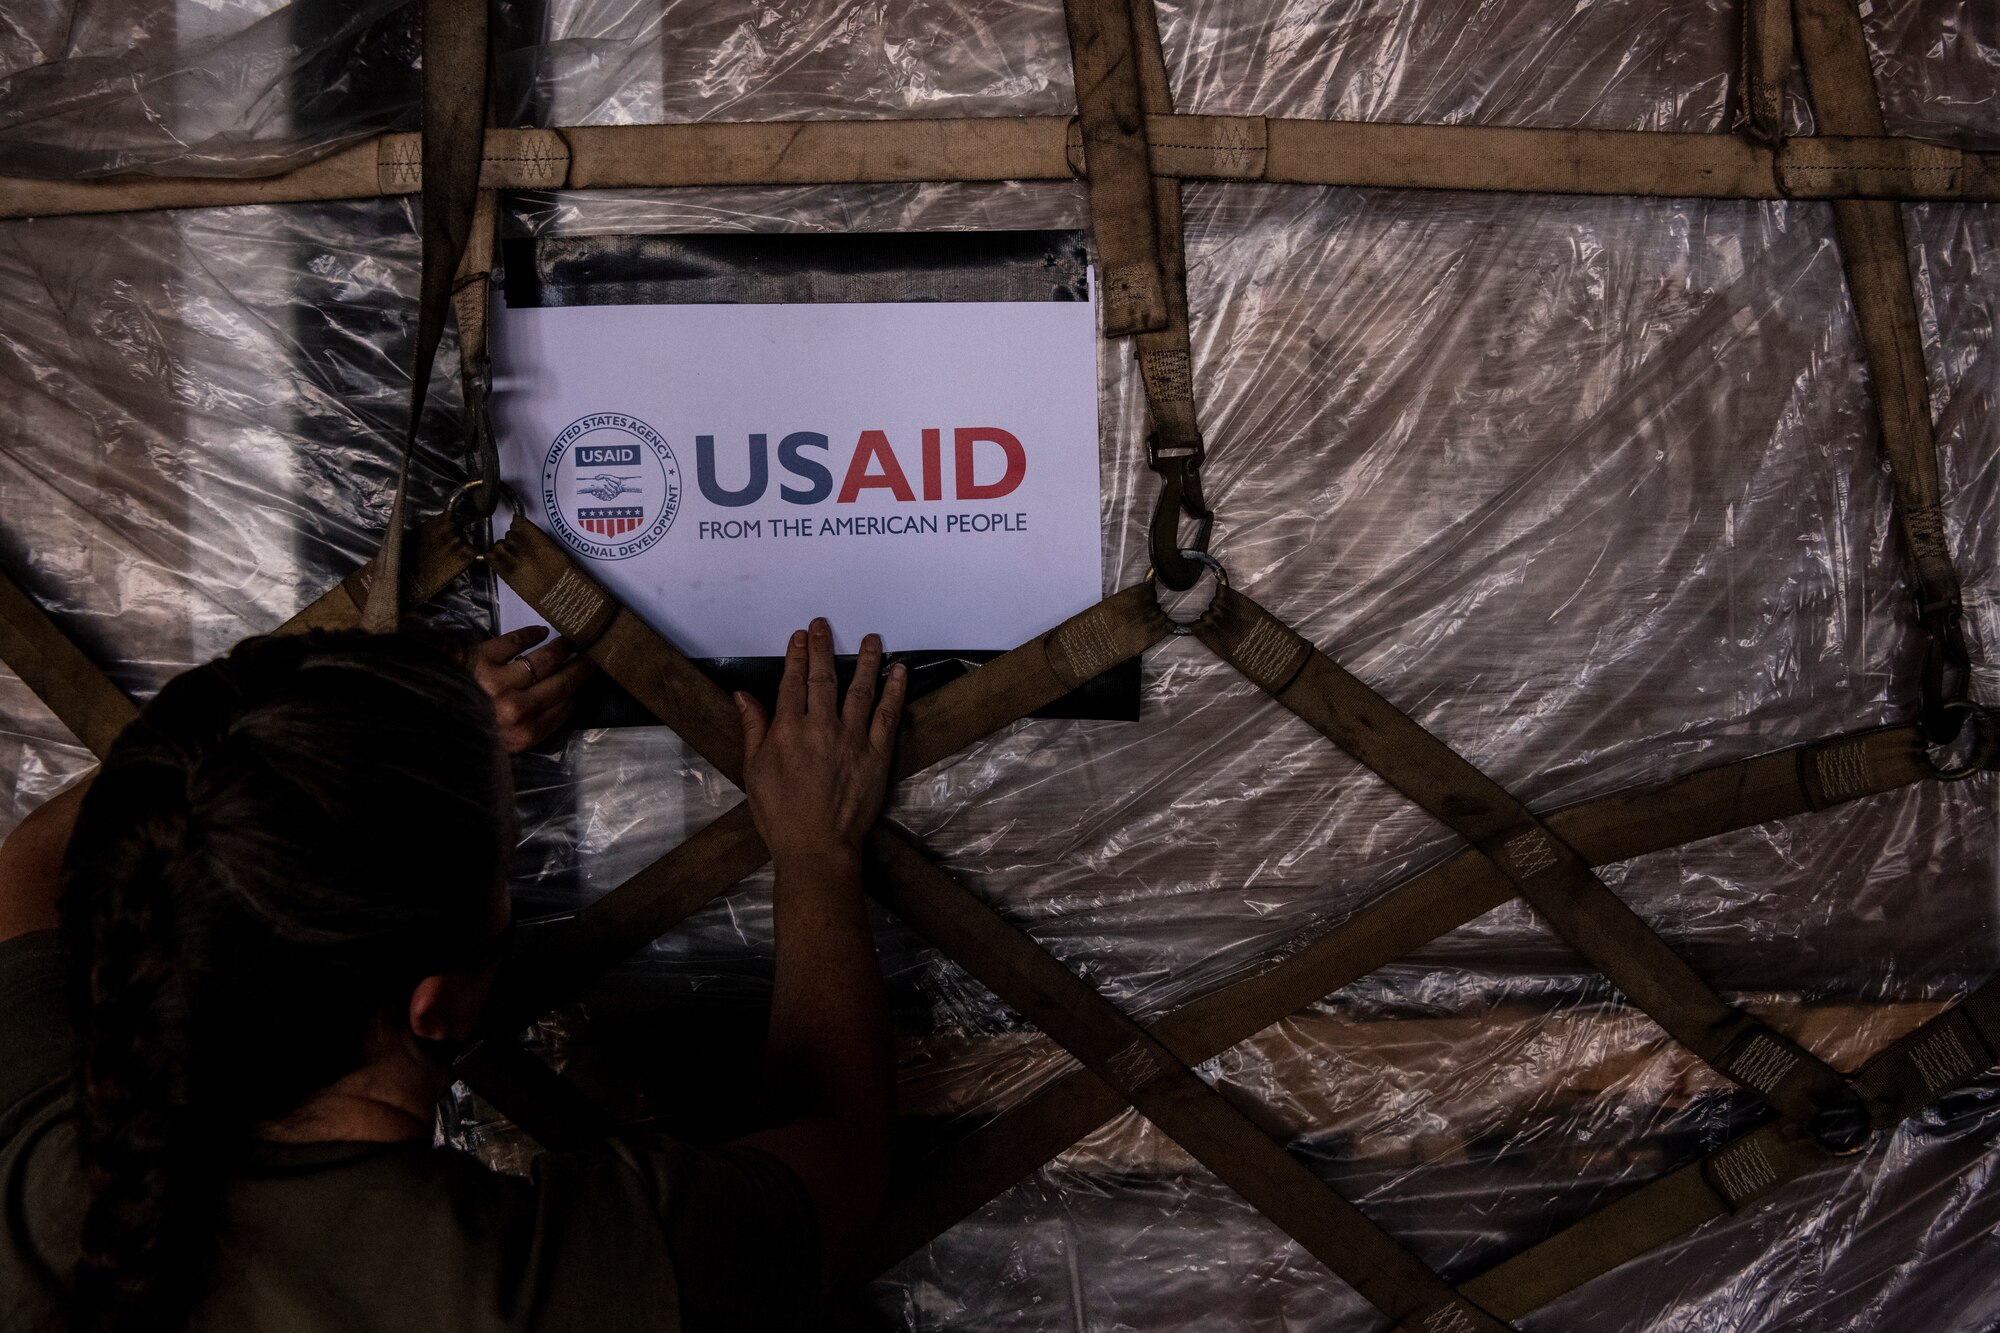 A sign is being placed on a pallet and the sign says "USAID, from the American people."